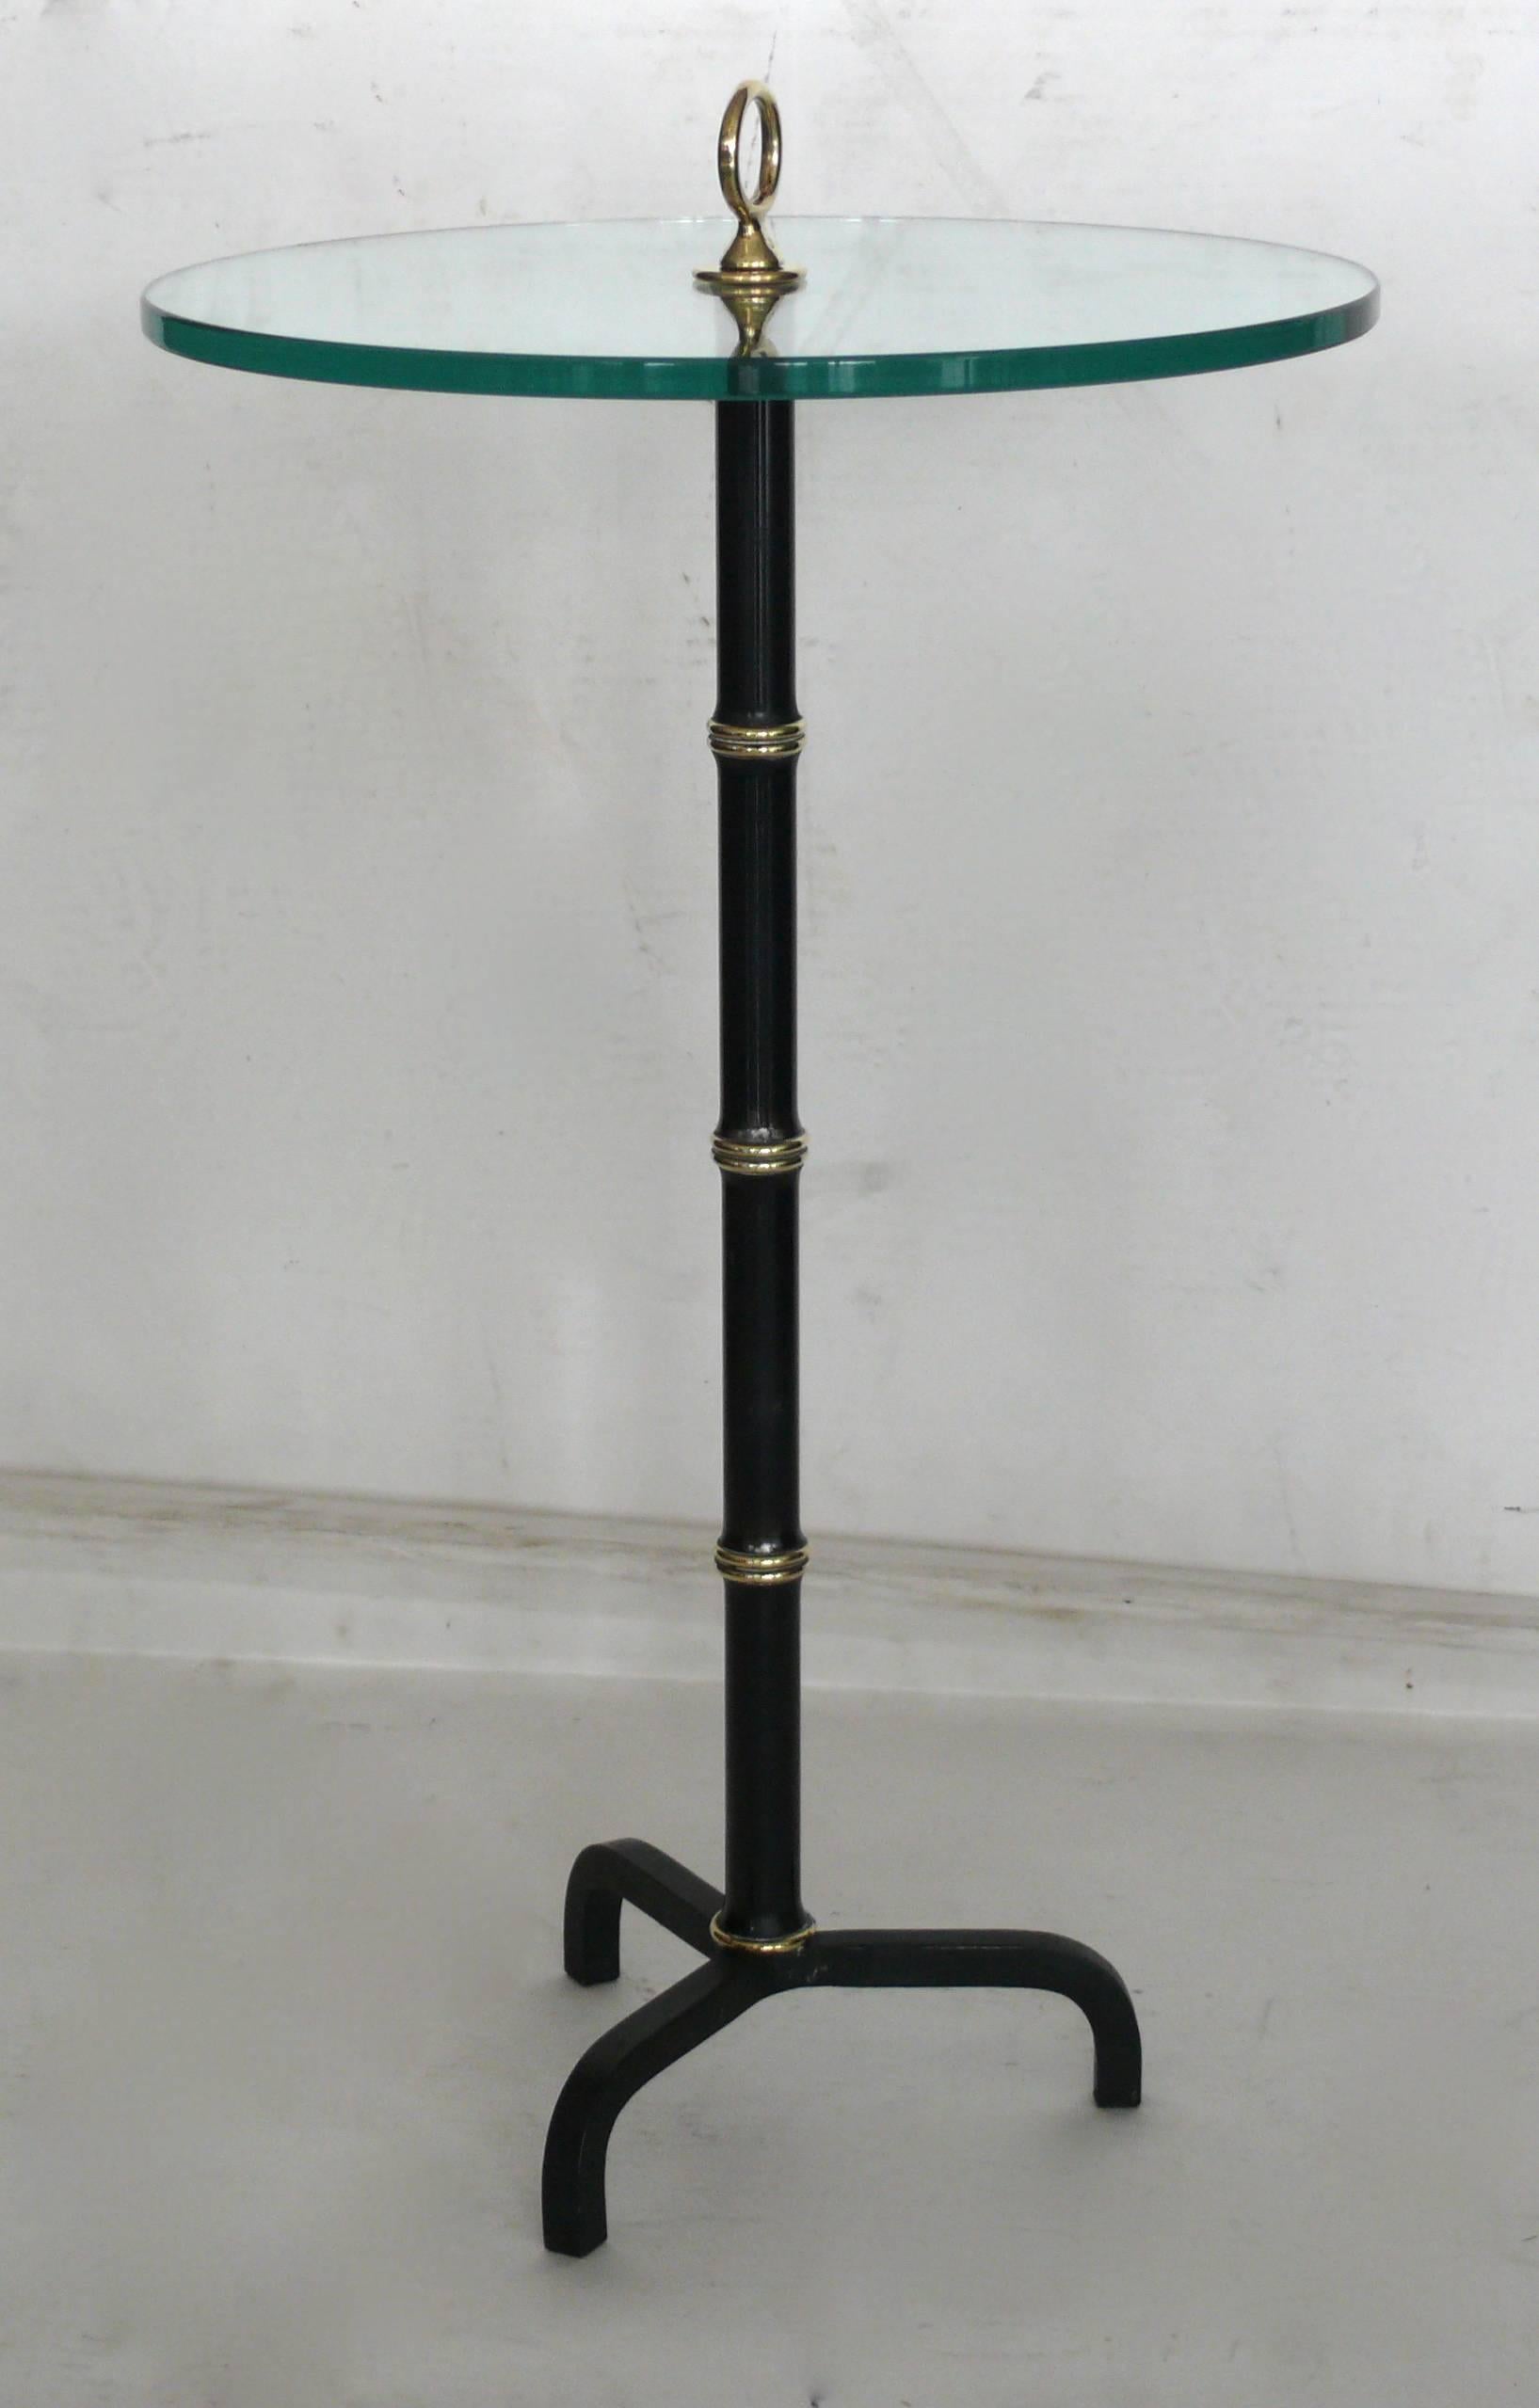 Art Deco in the style of Adnet tripod table with bamboo iron and brass bamboo stem with brass finial.  Excellent vintage condition. Perfect cocktail table.